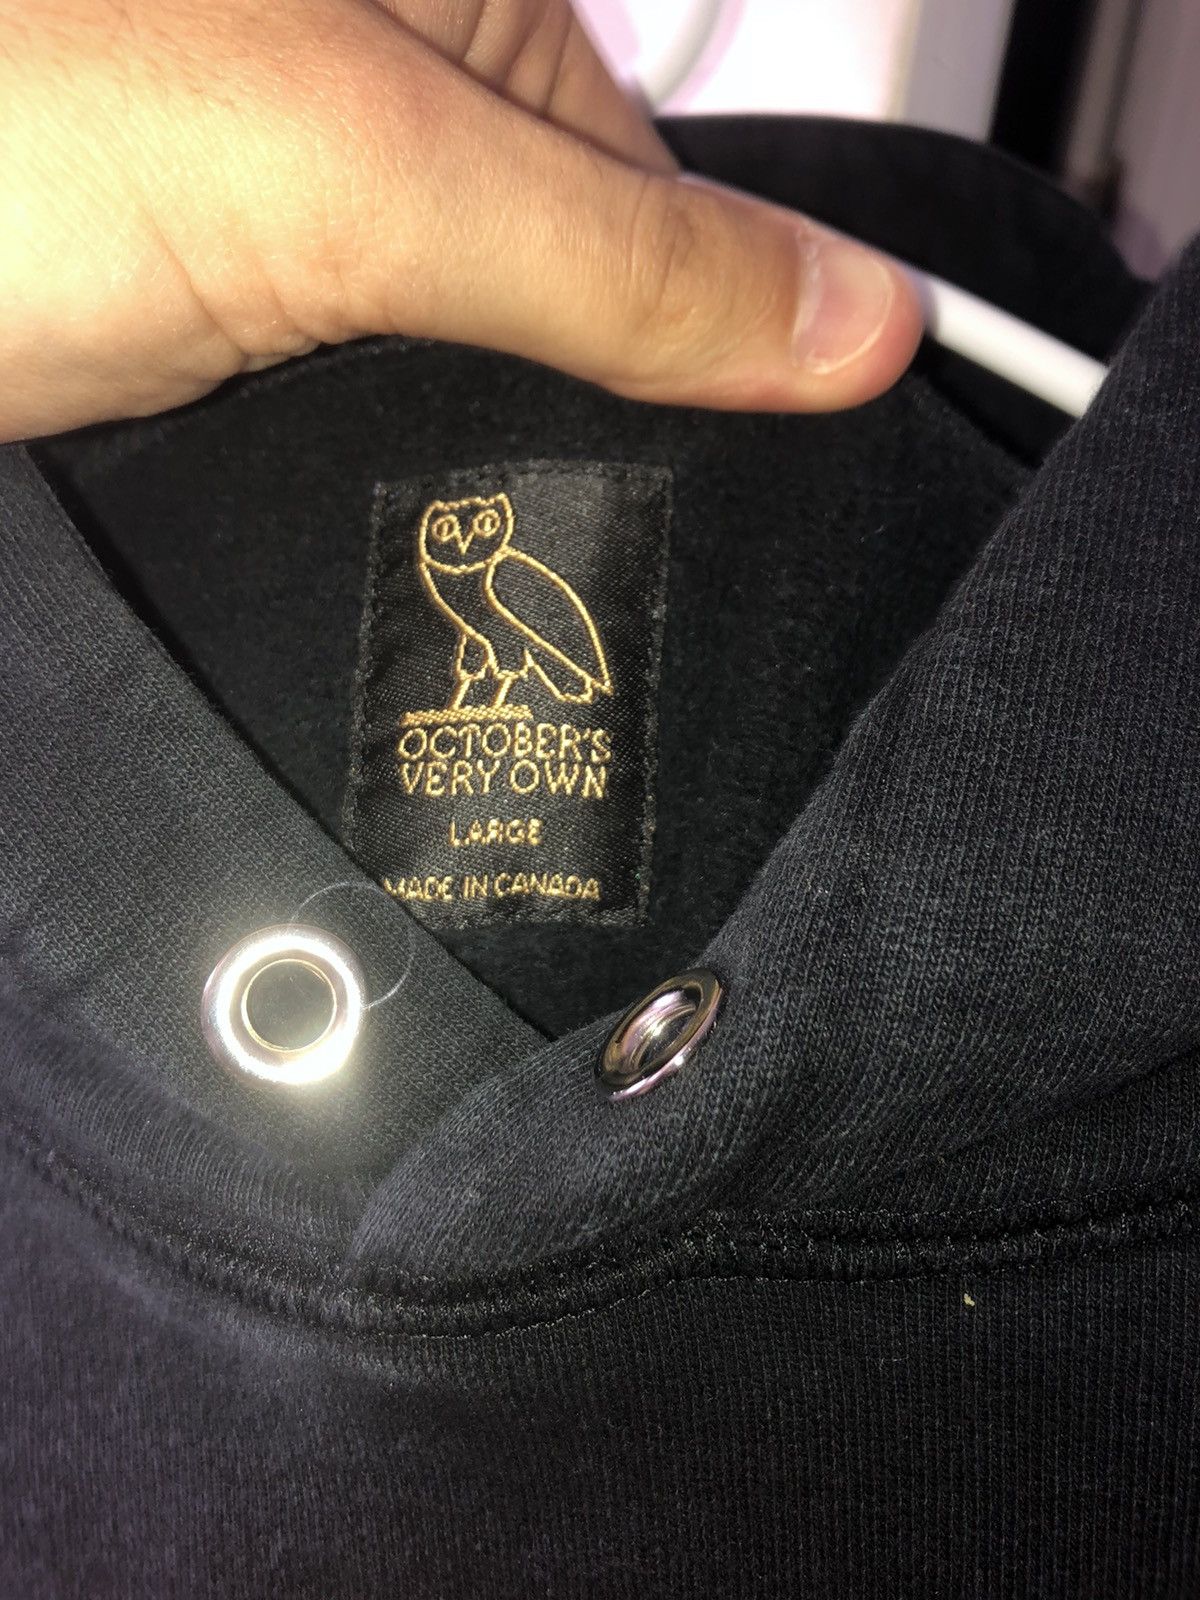 Octobers Very Own Black ovo hoodie 3m Size US L / EU 52-54 / 3 - 3 Thumbnail